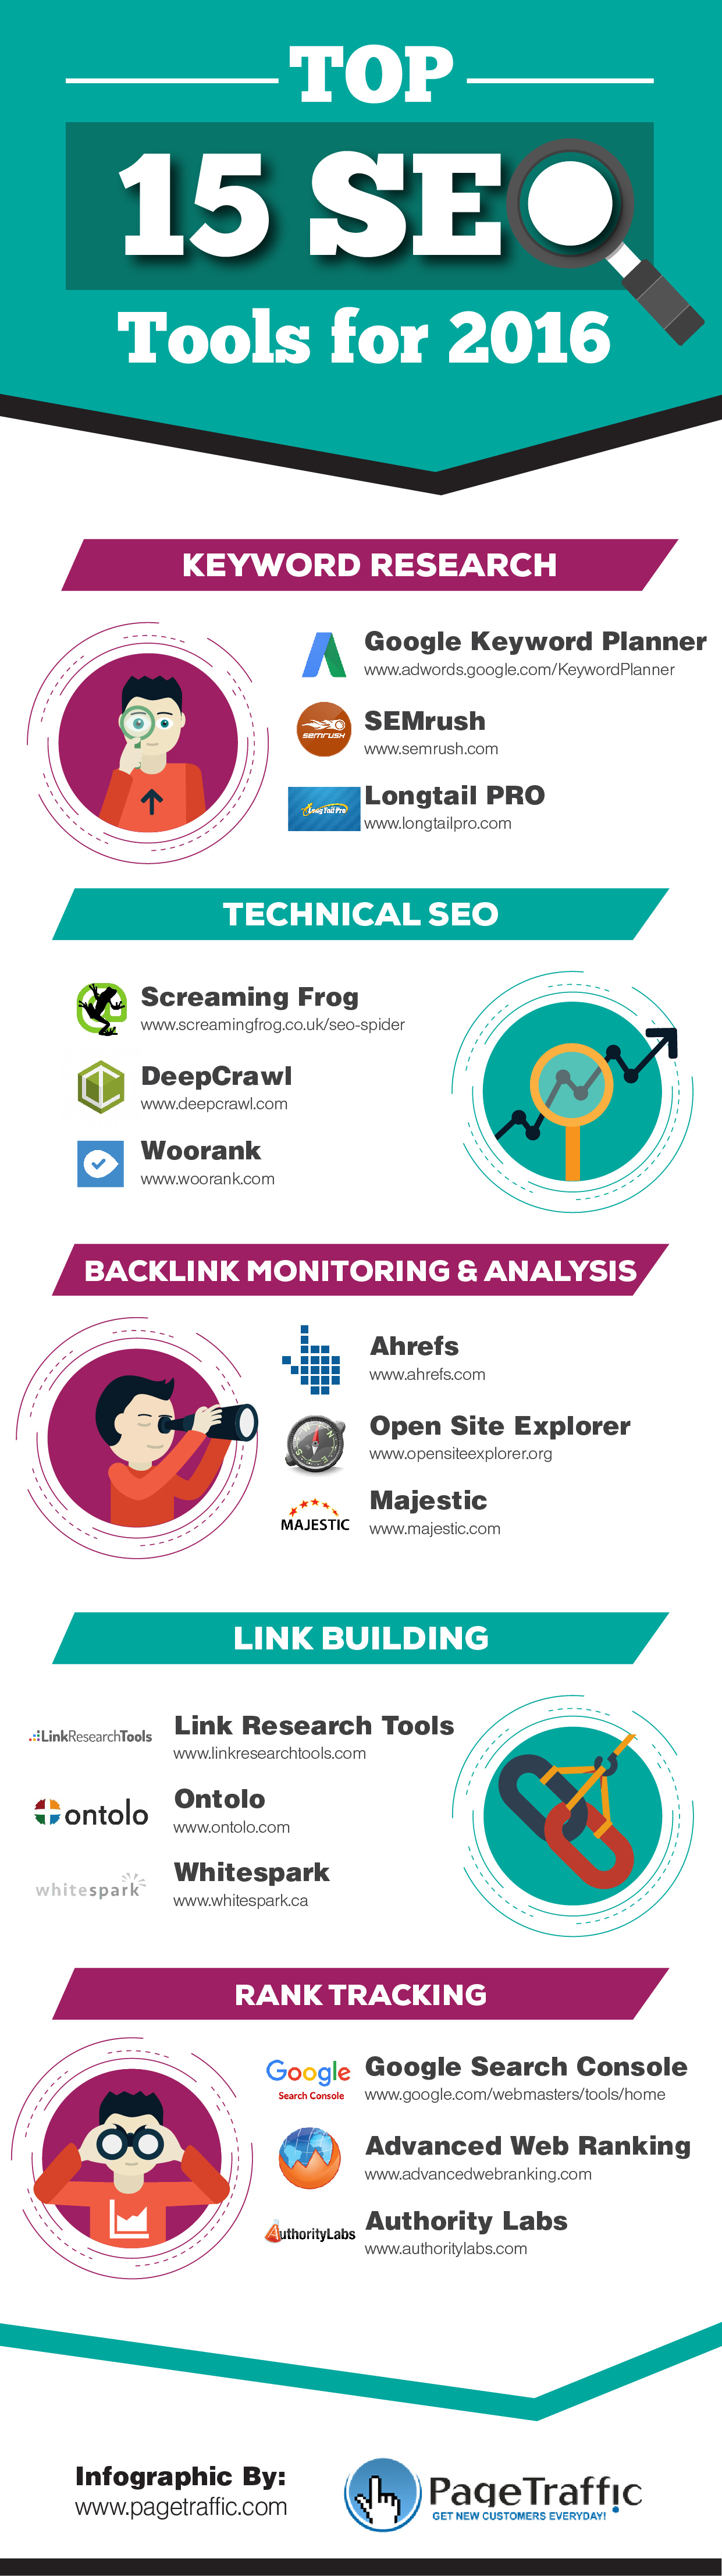 Top-15-SEO-Tools-for-2016-infographic-image